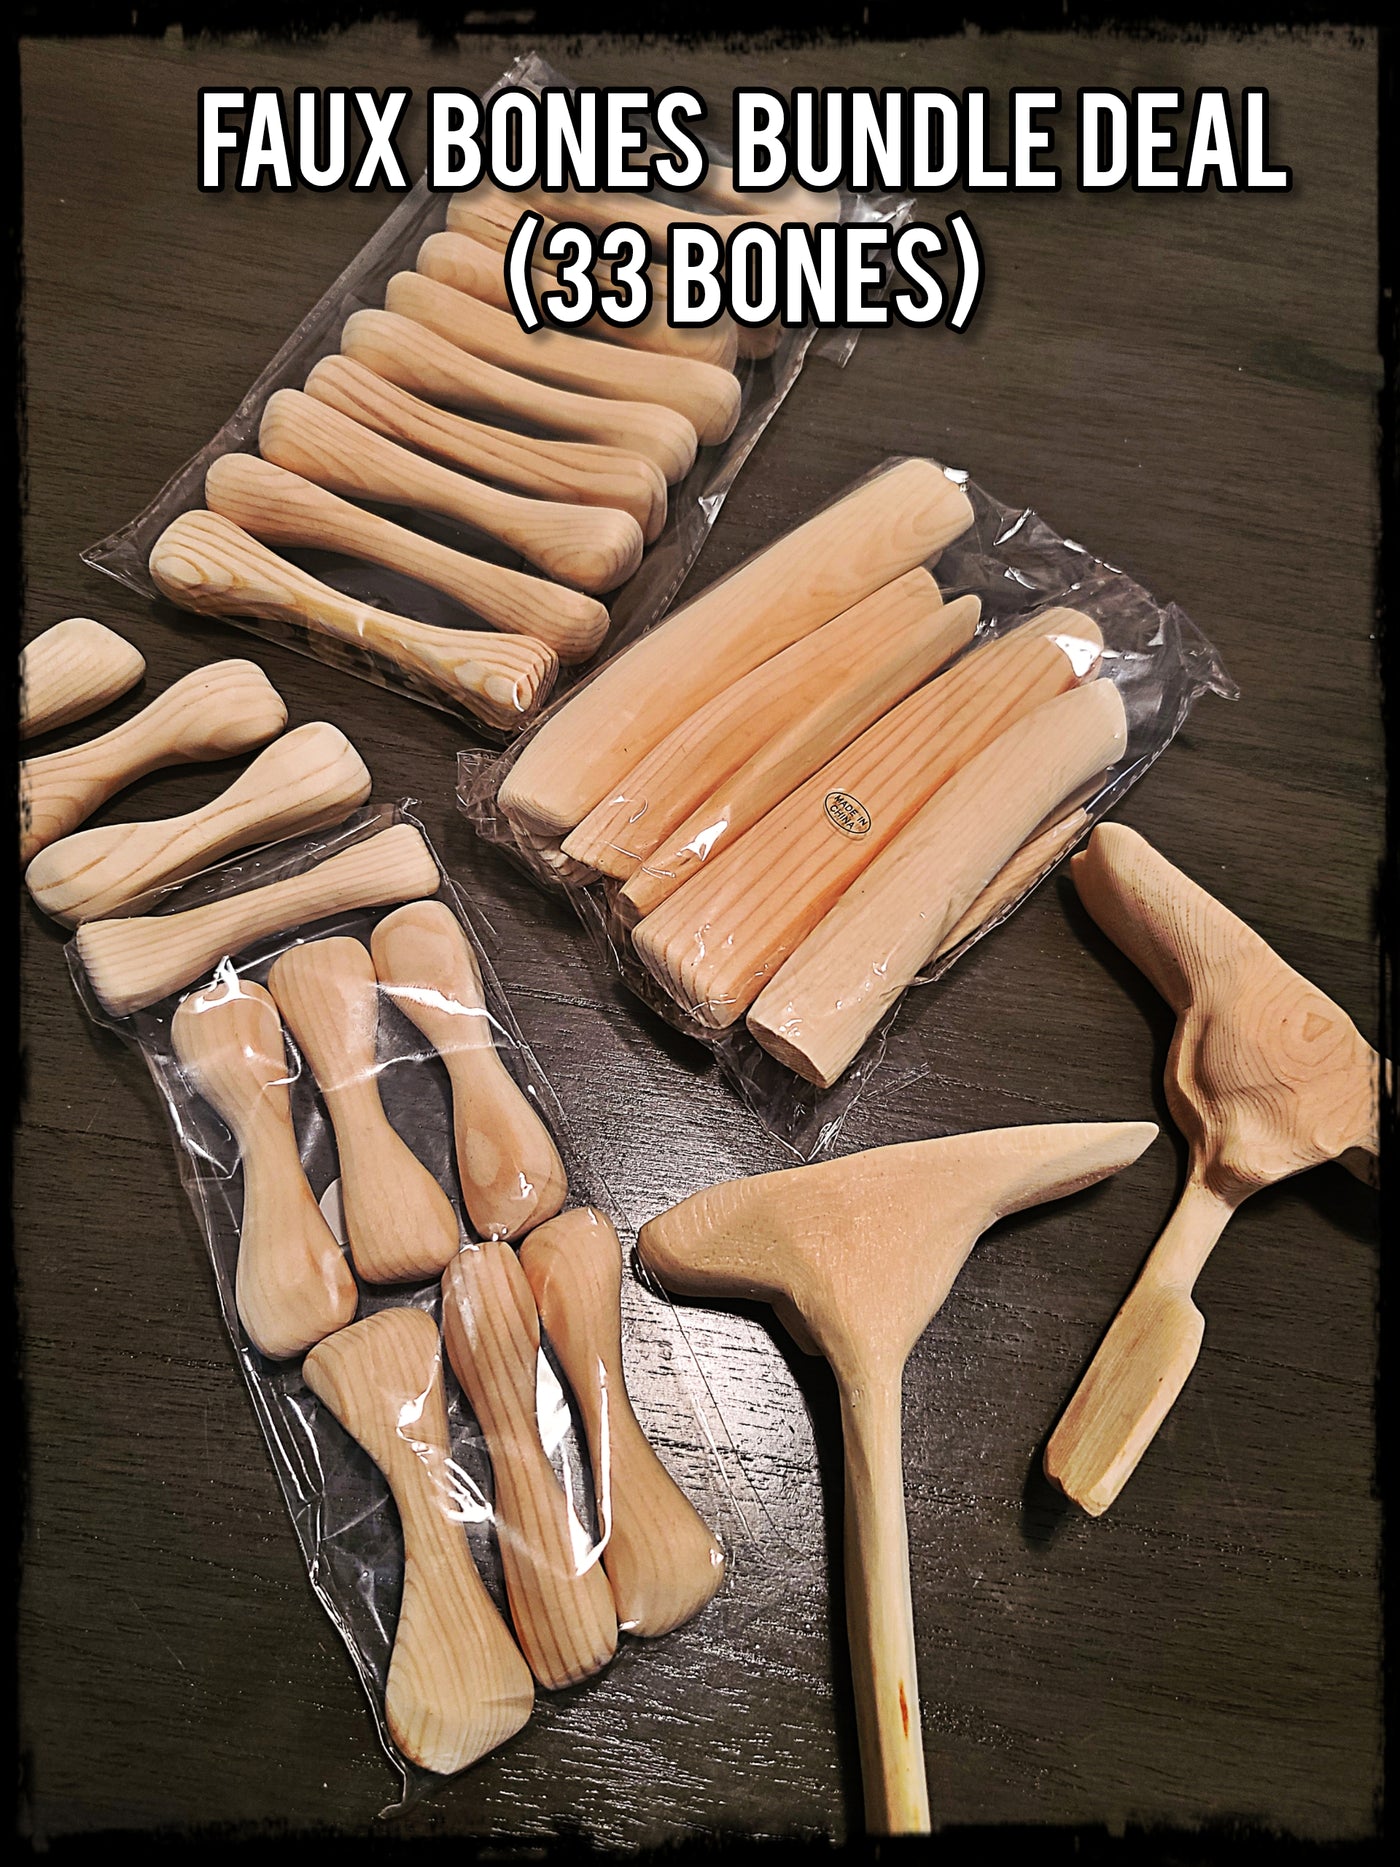 Bundle Deal! Try all 5 types of Faux Bones!